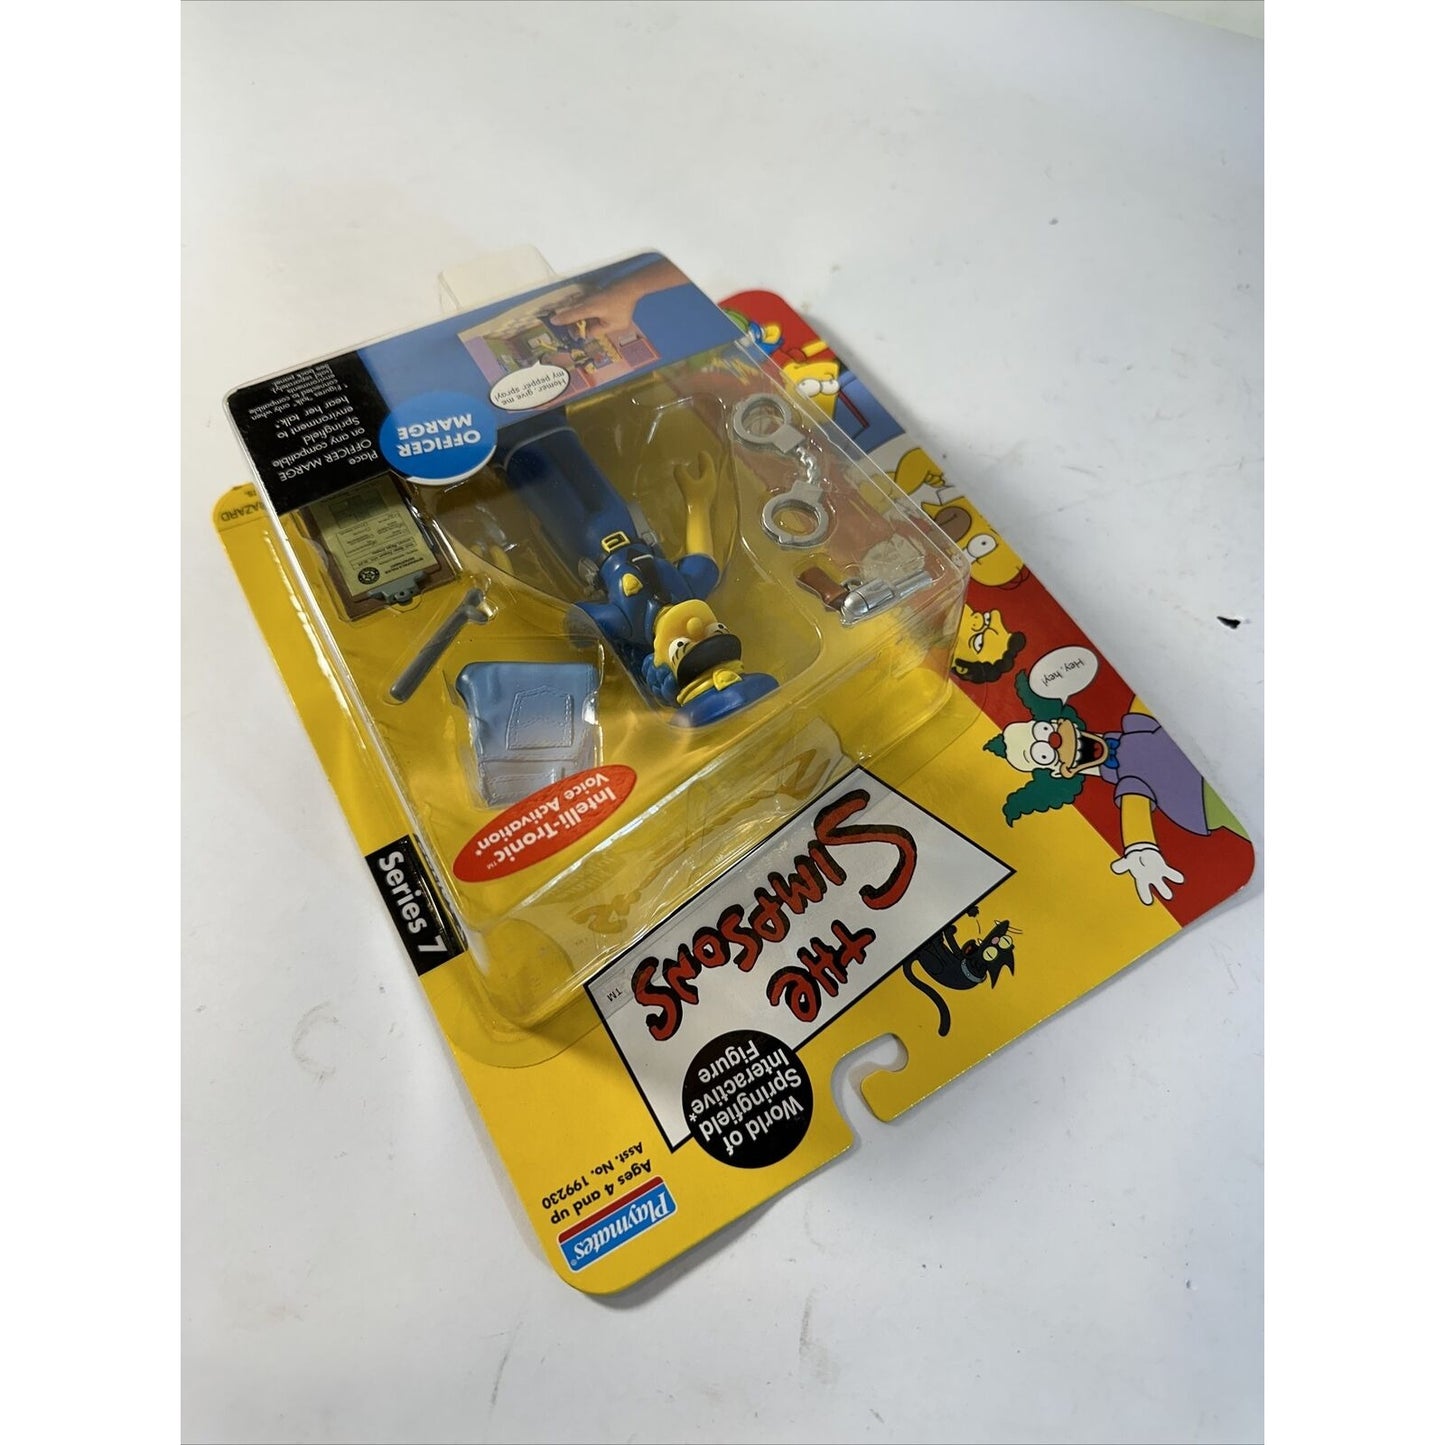 Simpsons Officer Marge Series 7 World of Springfield Action Figure Playmates